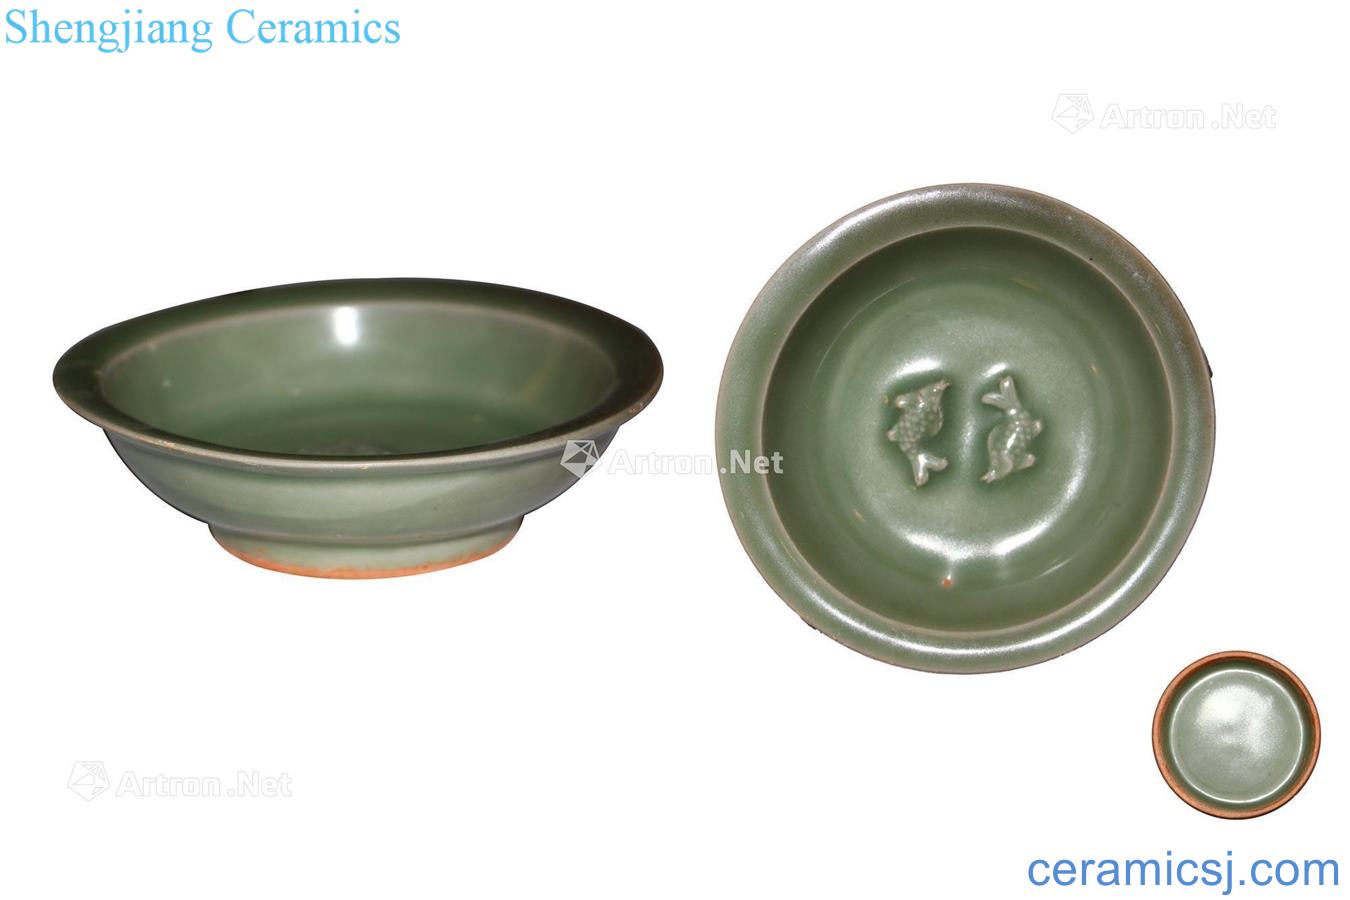 The song dynasty Longquan celadon Pisces wash